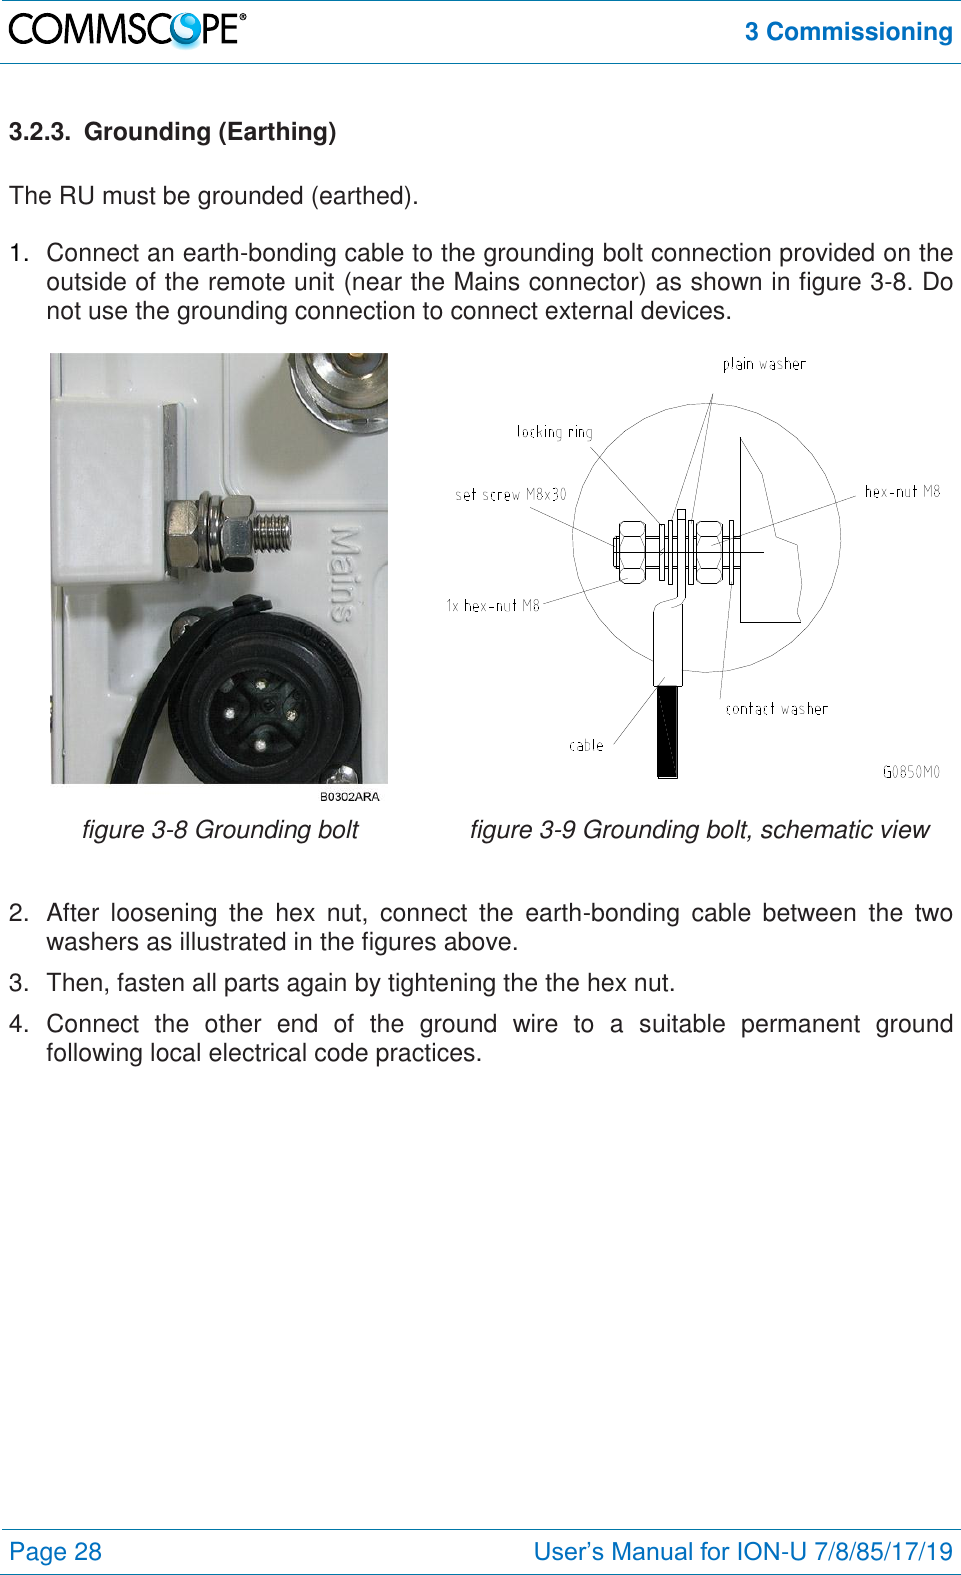  3 Commissioning  Page 28 User’s Manual for ION-U 7/8/85/17/19  3.2.3.  Grounding (Earthing)  The RU must be grounded (earthed).  1. Connect an earth-bonding cable to the grounding bolt connection provided on the outside of the remote unit (near the Mains connector) as shown in figure 3-8. Do not use the grounding connection to connect external devices.    figure 3-8 Grounding bolt figure 3-9 Grounding bolt, schematic view  2.  After  loosening  the  hex  nut,  connect  the  earth-bonding  cable  between  the  two washers as illustrated in the figures above. 3.  Then, fasten all parts again by tightening the the hex nut. 4.  Connect  the  other  end  of  the  ground  wire  to  a  suitable  permanent  ground following local electrical code practices. 